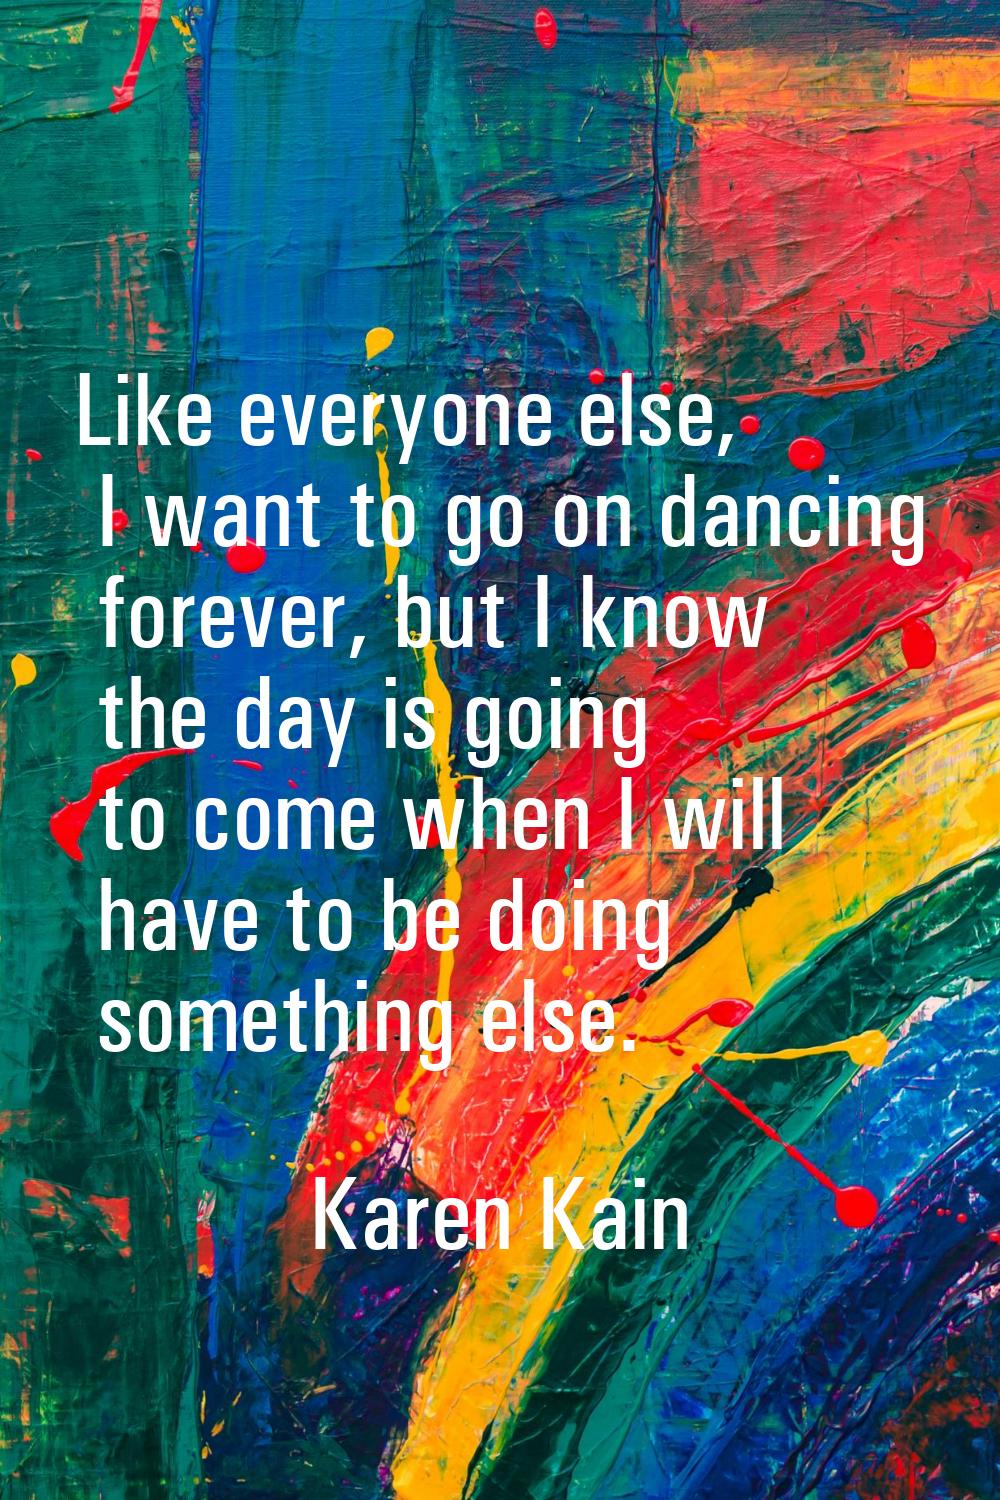 Like everyone else, I want to go on dancing forever, but I know the day is going to come when I wil